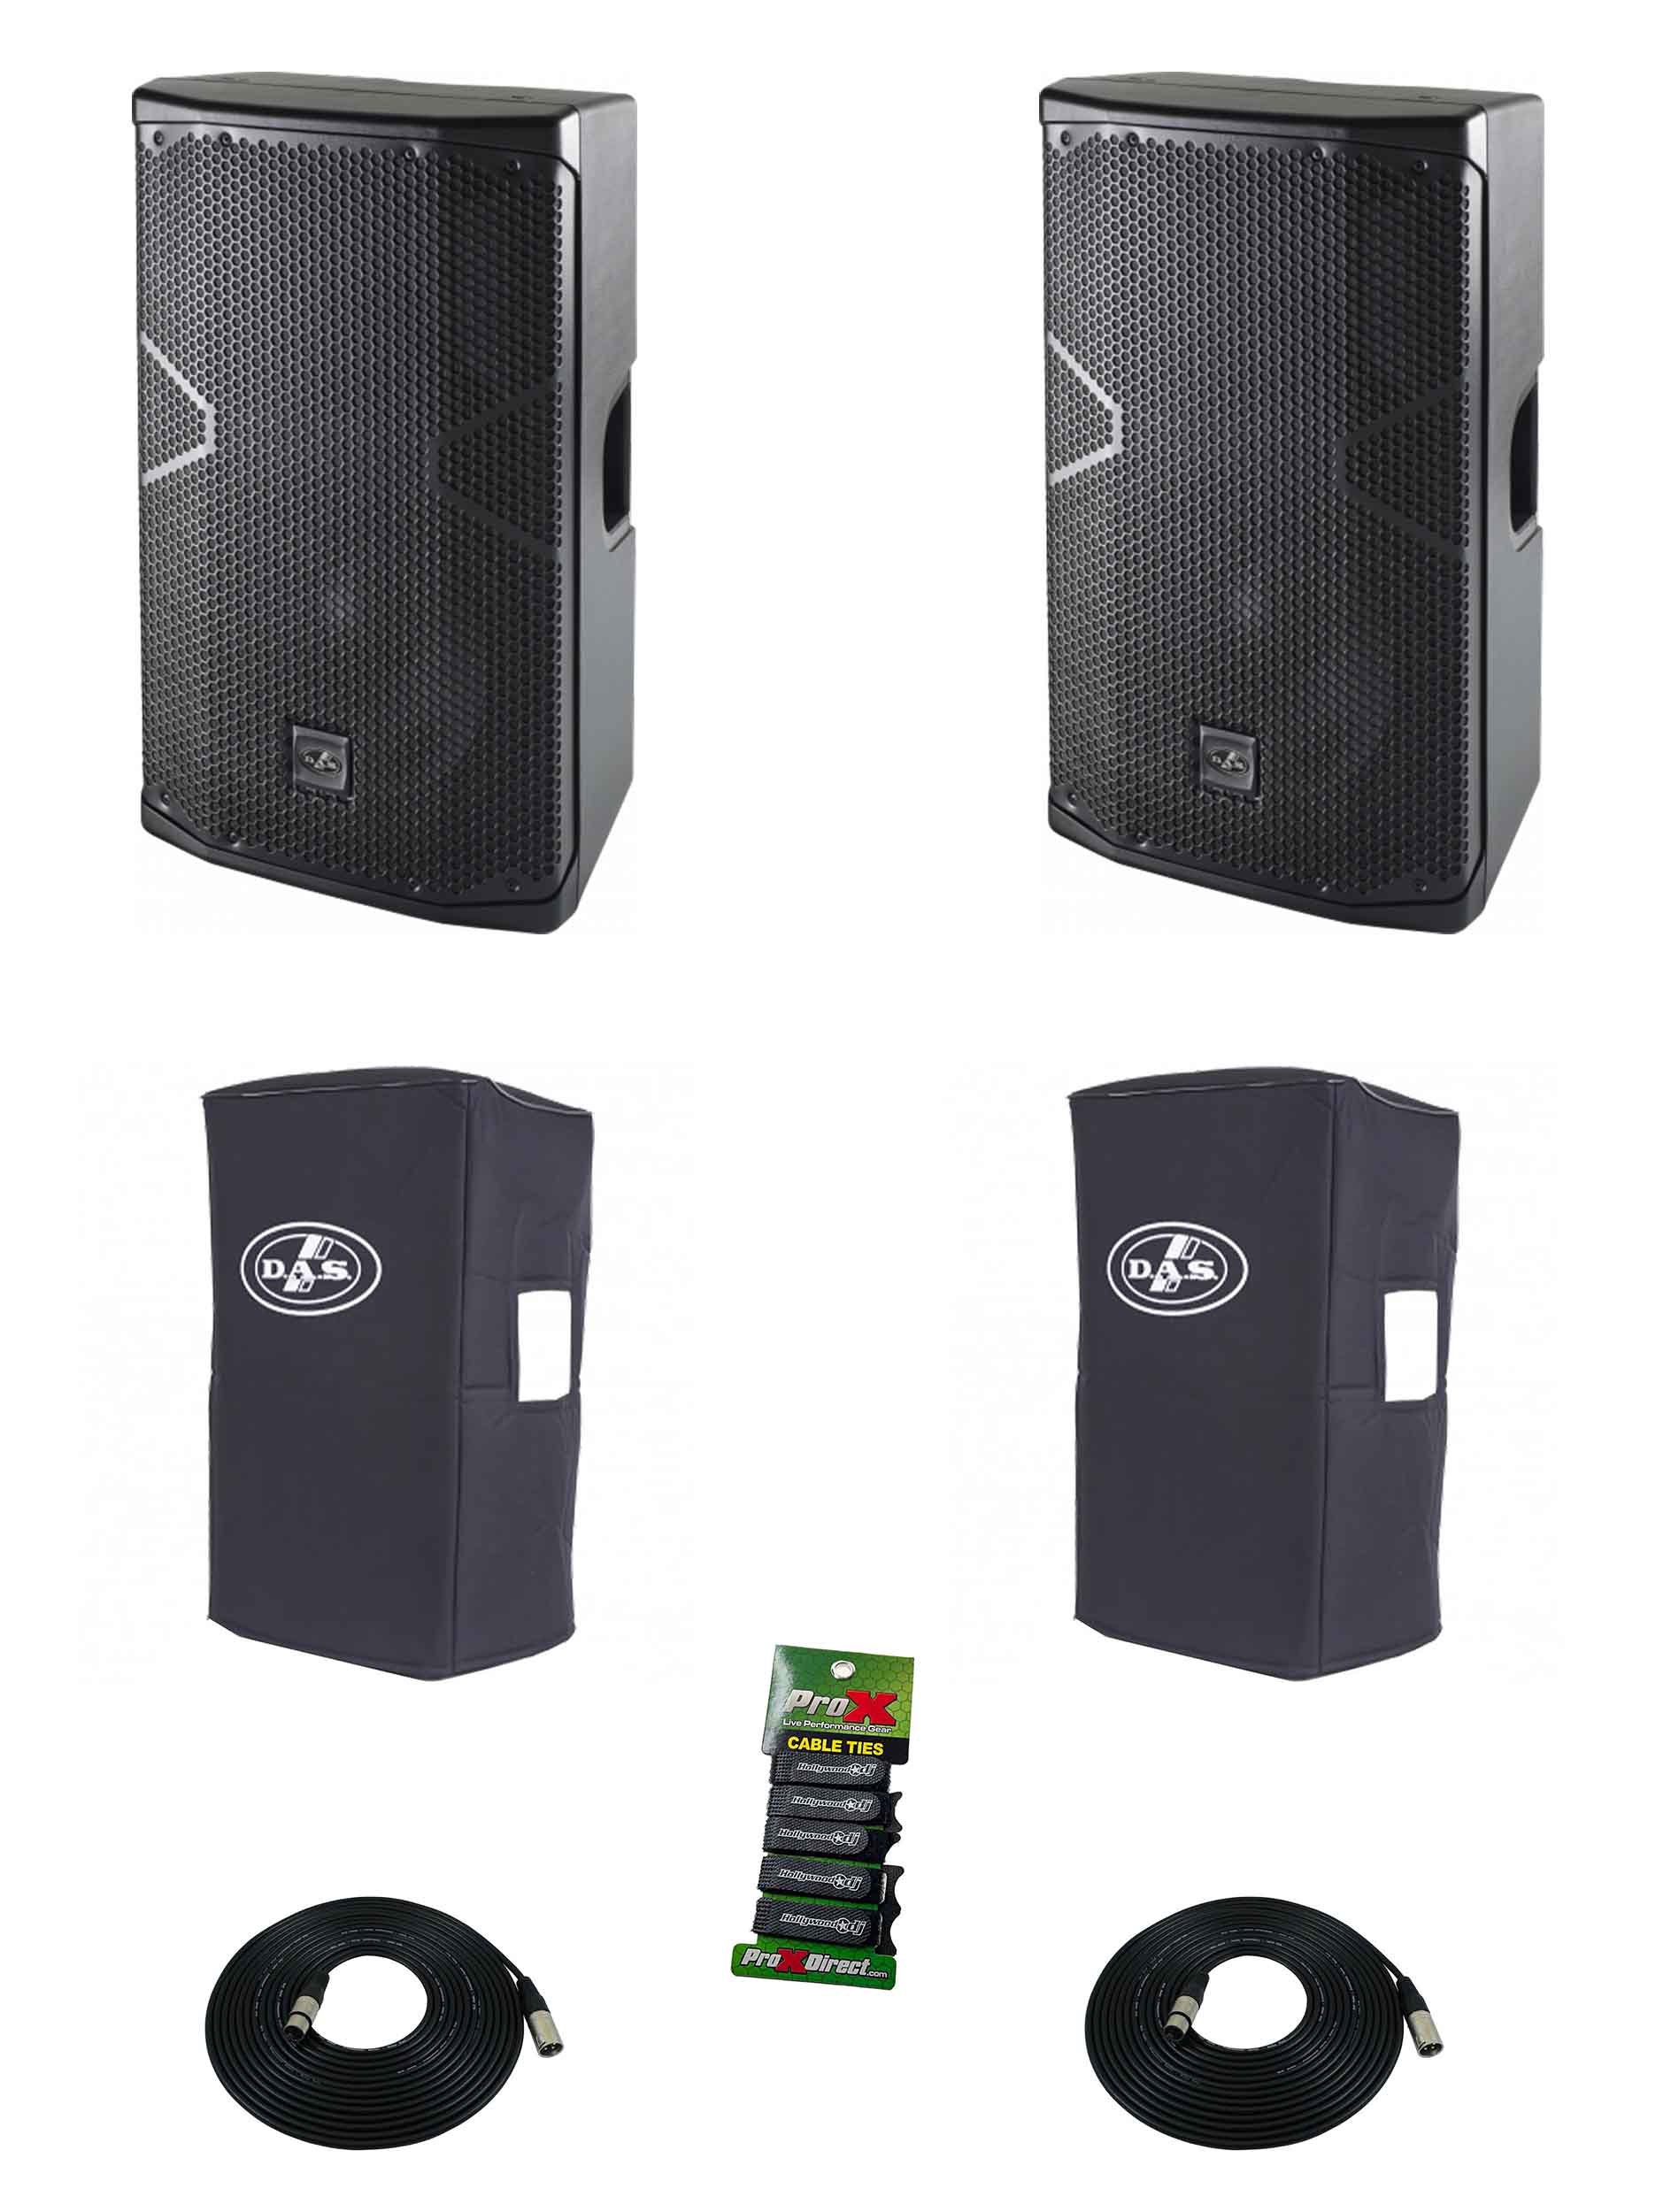 DAS Audio 412ACVRALTEA12 12-Inch Powered Speakers DJ Package with Covers and Cables